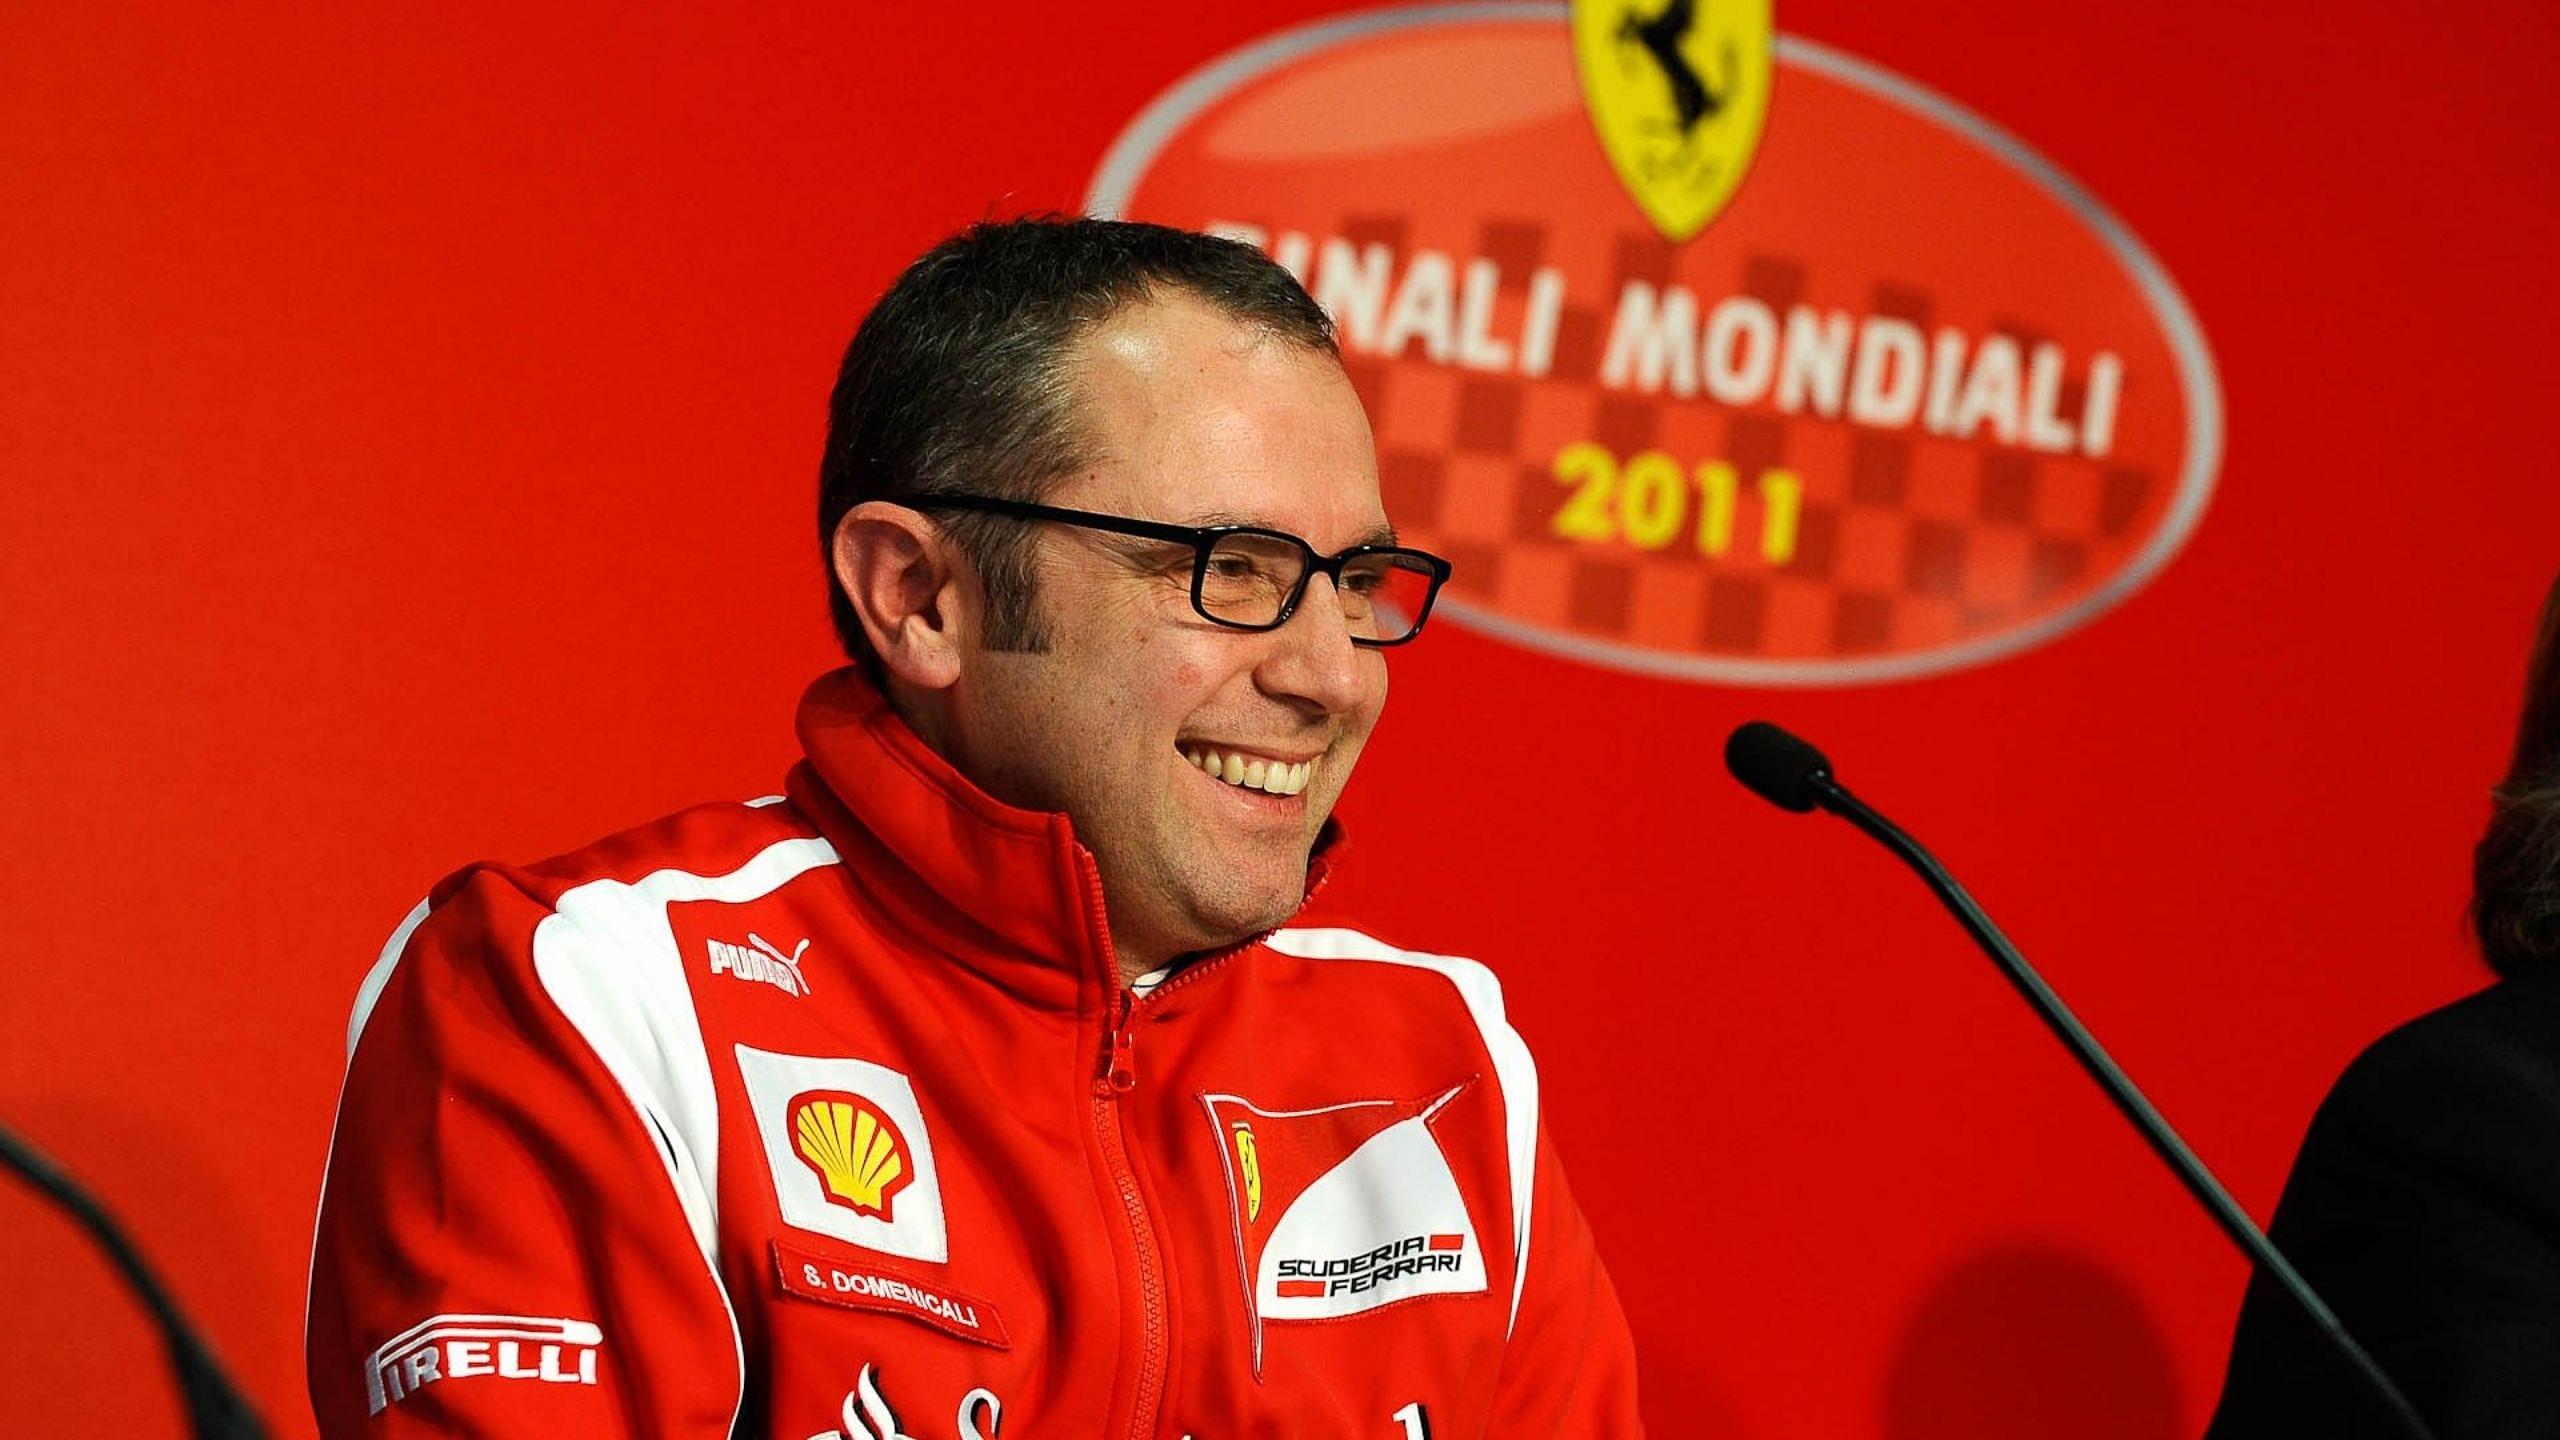 "Any rumour or speculation otherwise is wrong." - Formula 1 dismiss suggestion Stefano Domenicali will return to Ferrari to replace Louis Camilleri